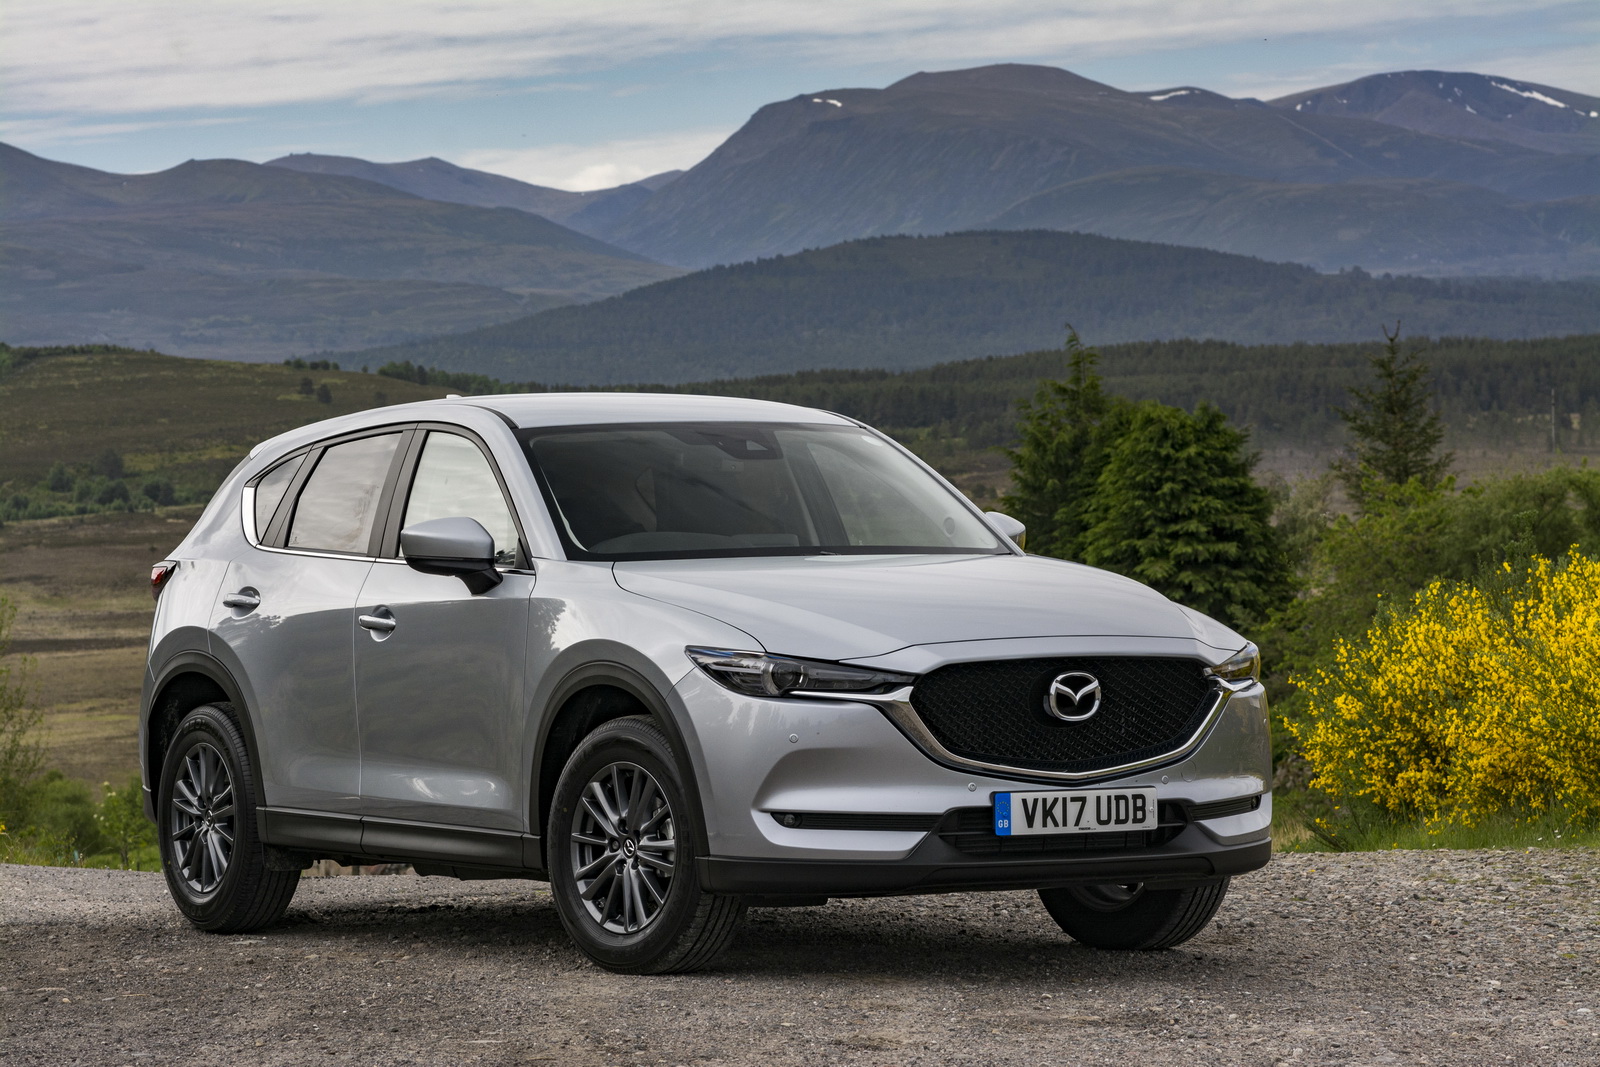 2017 Mazda CX-5 Priced From £23,695 In The UK [46 Pics] | Carscoops